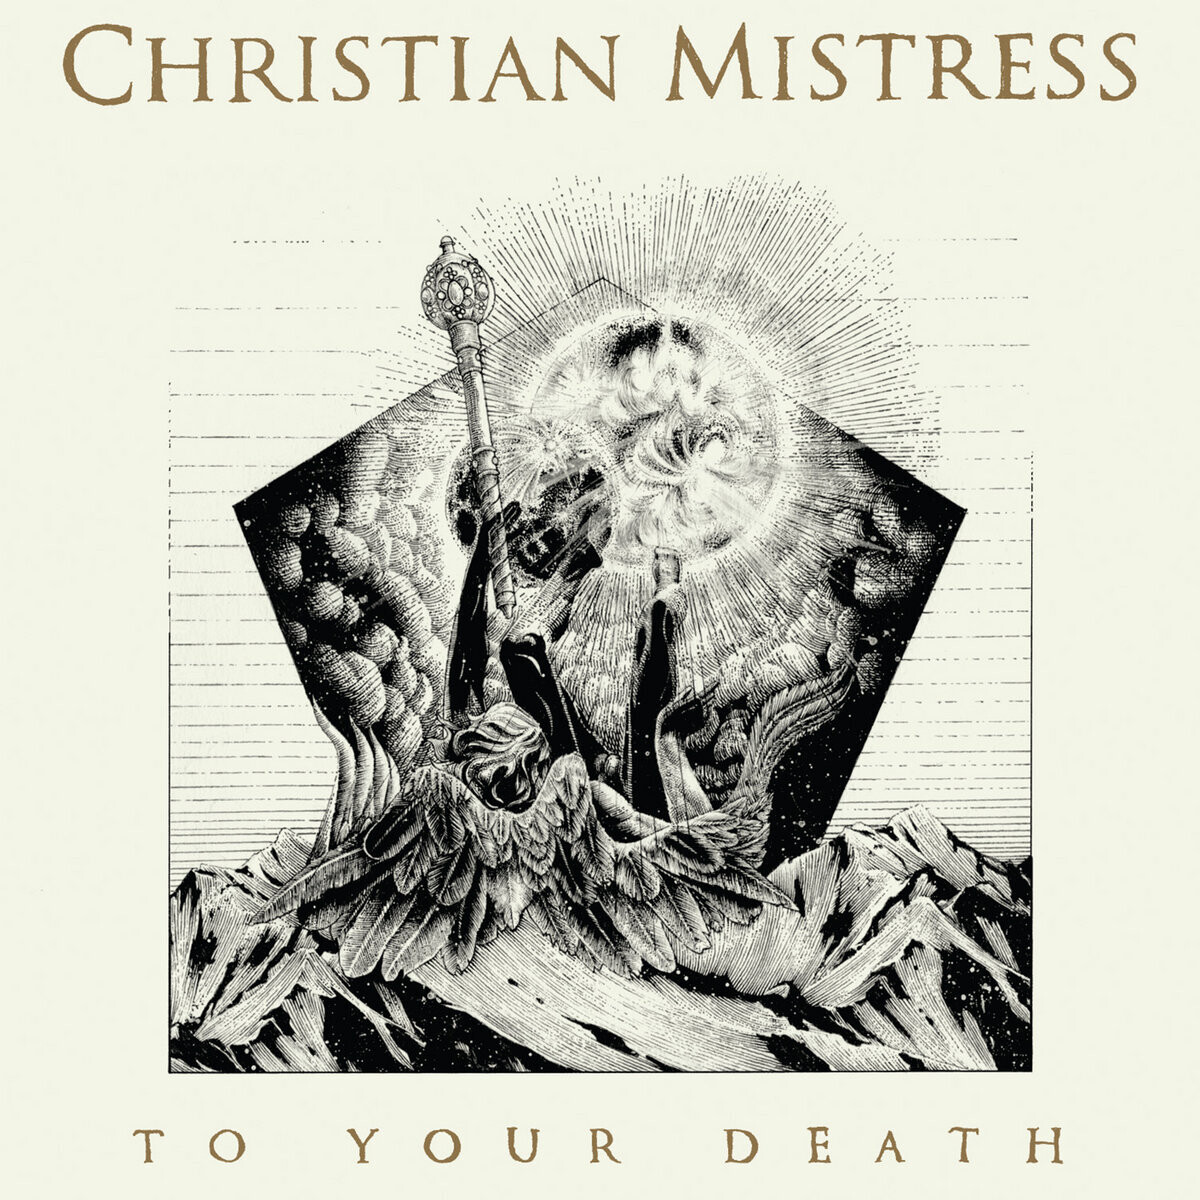 Christian Mistress "To Your Death" NM 2015